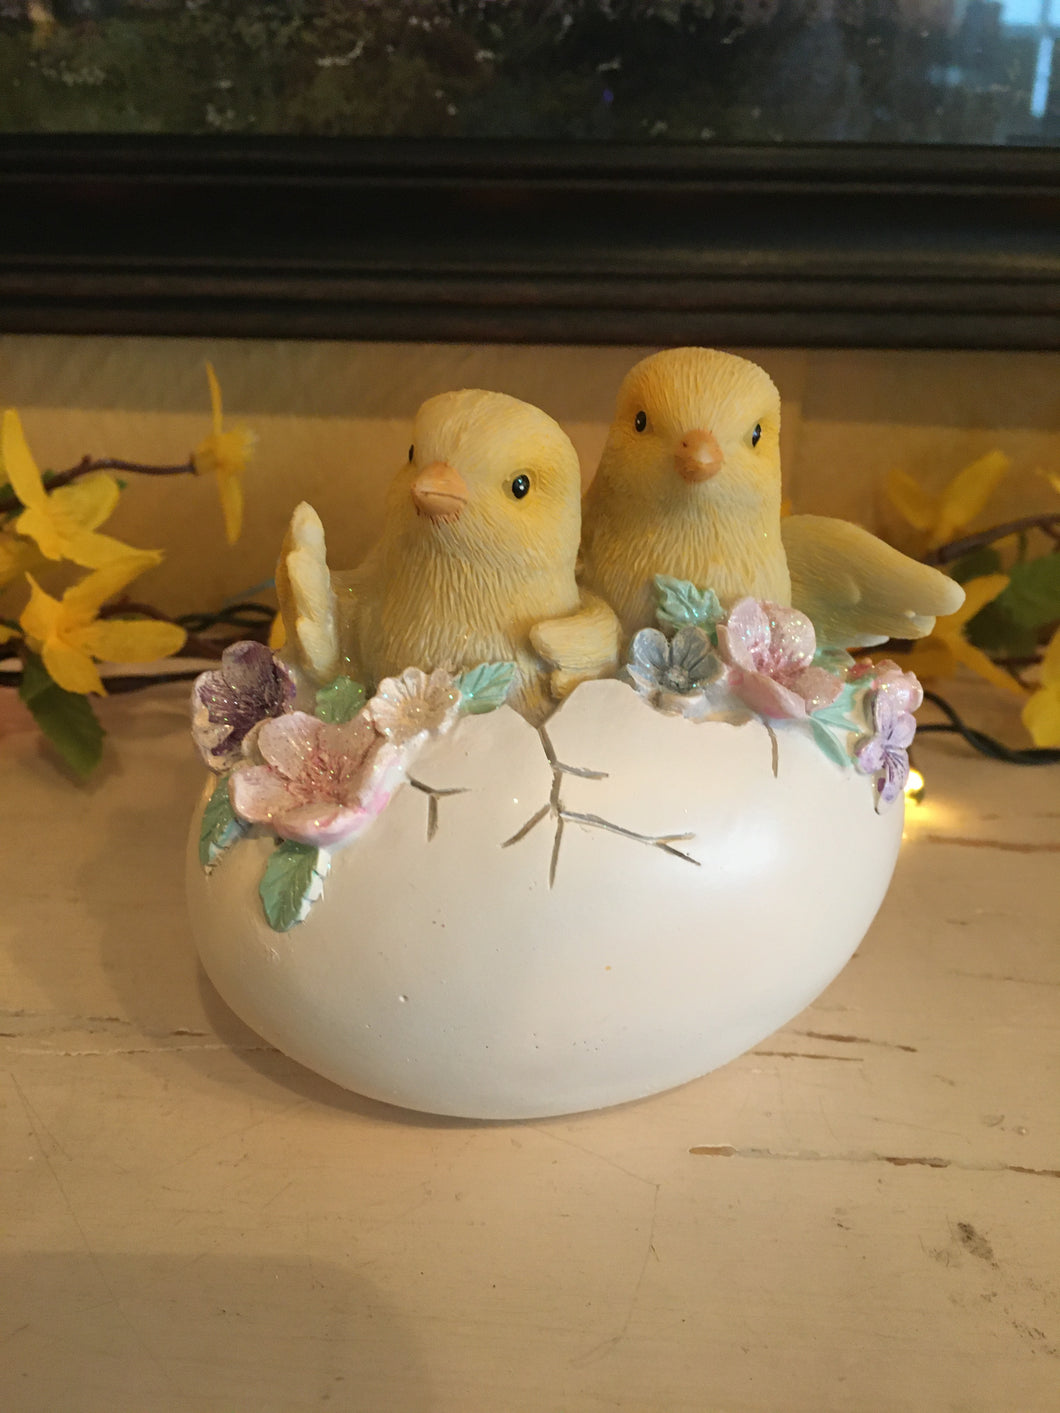 Two Chicks in an Easter Egg, Vintage Style